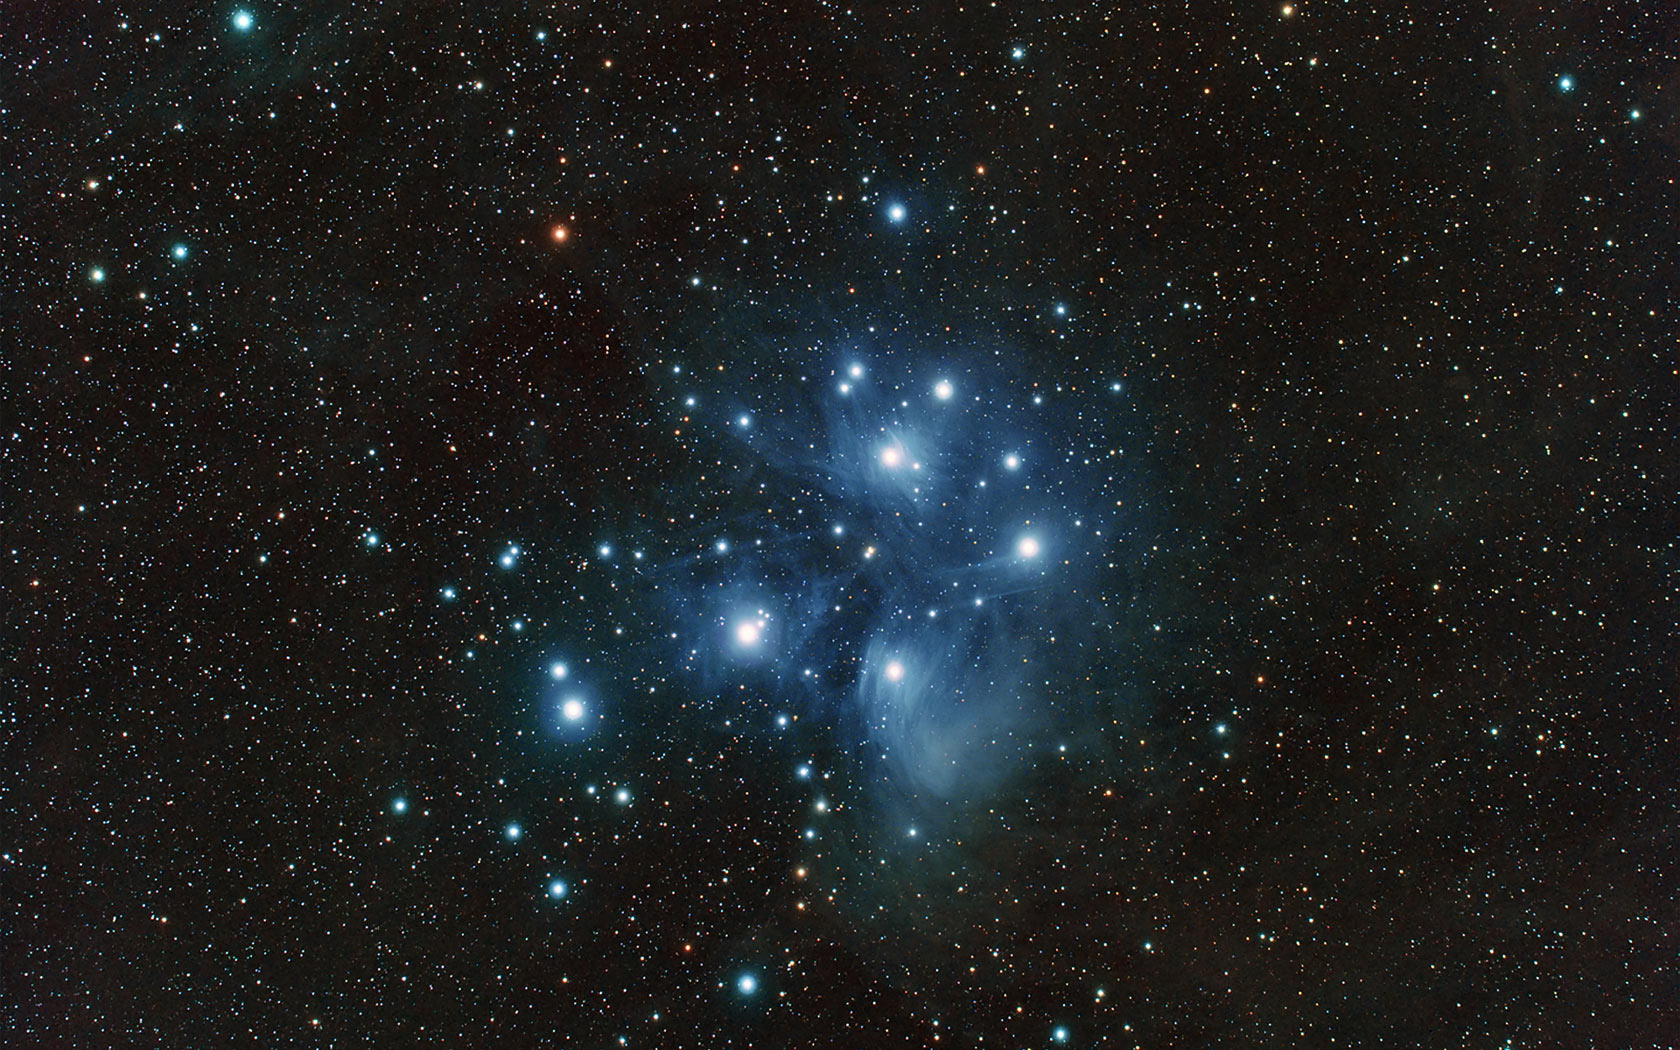 The Pleiades Star Cluster Messier